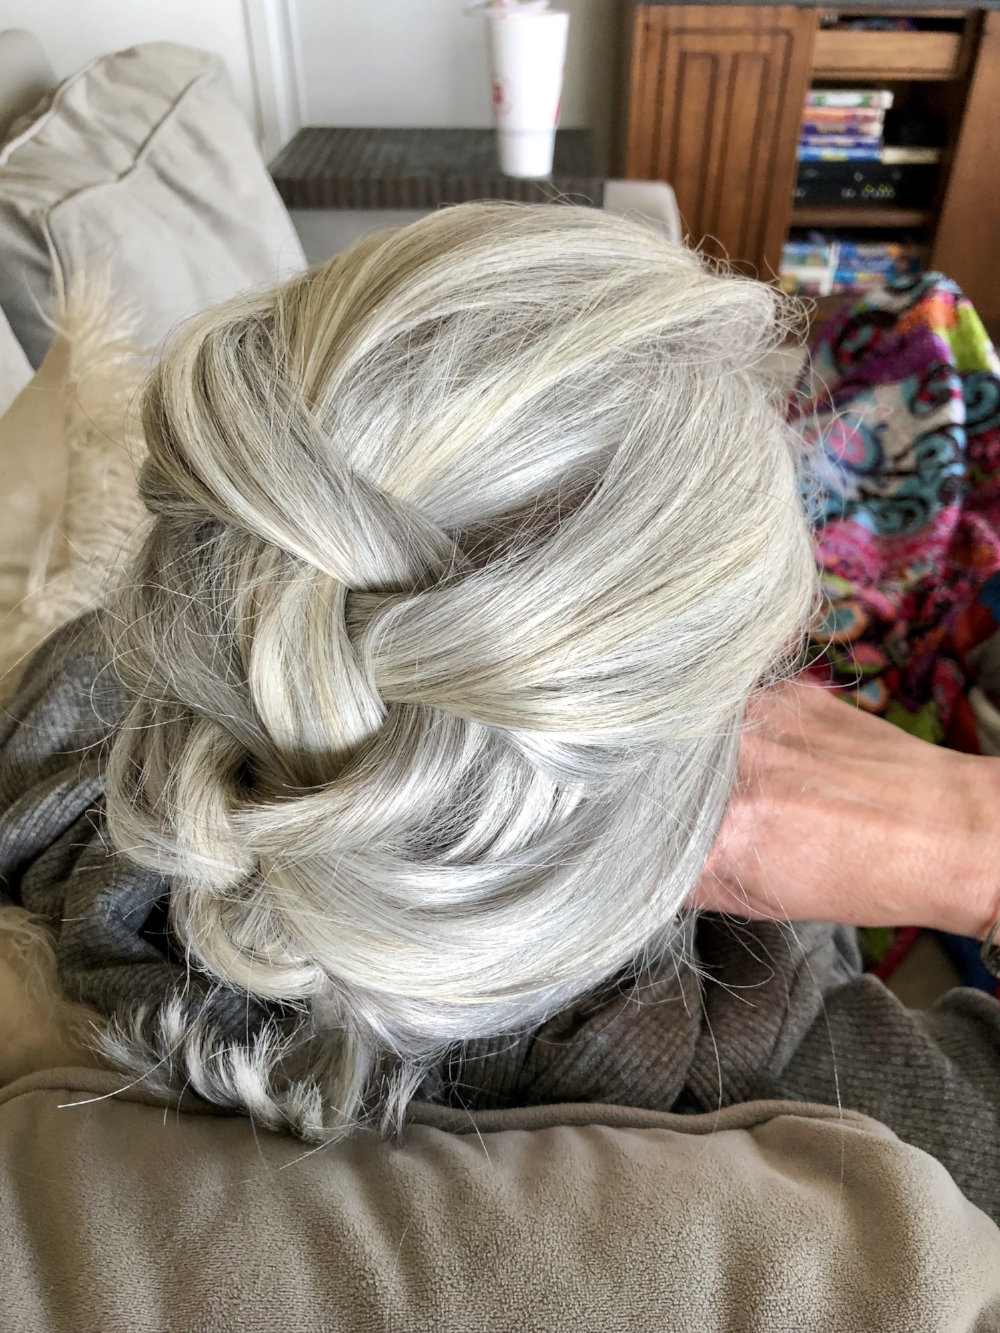 How to Embrace Your Silver Hair